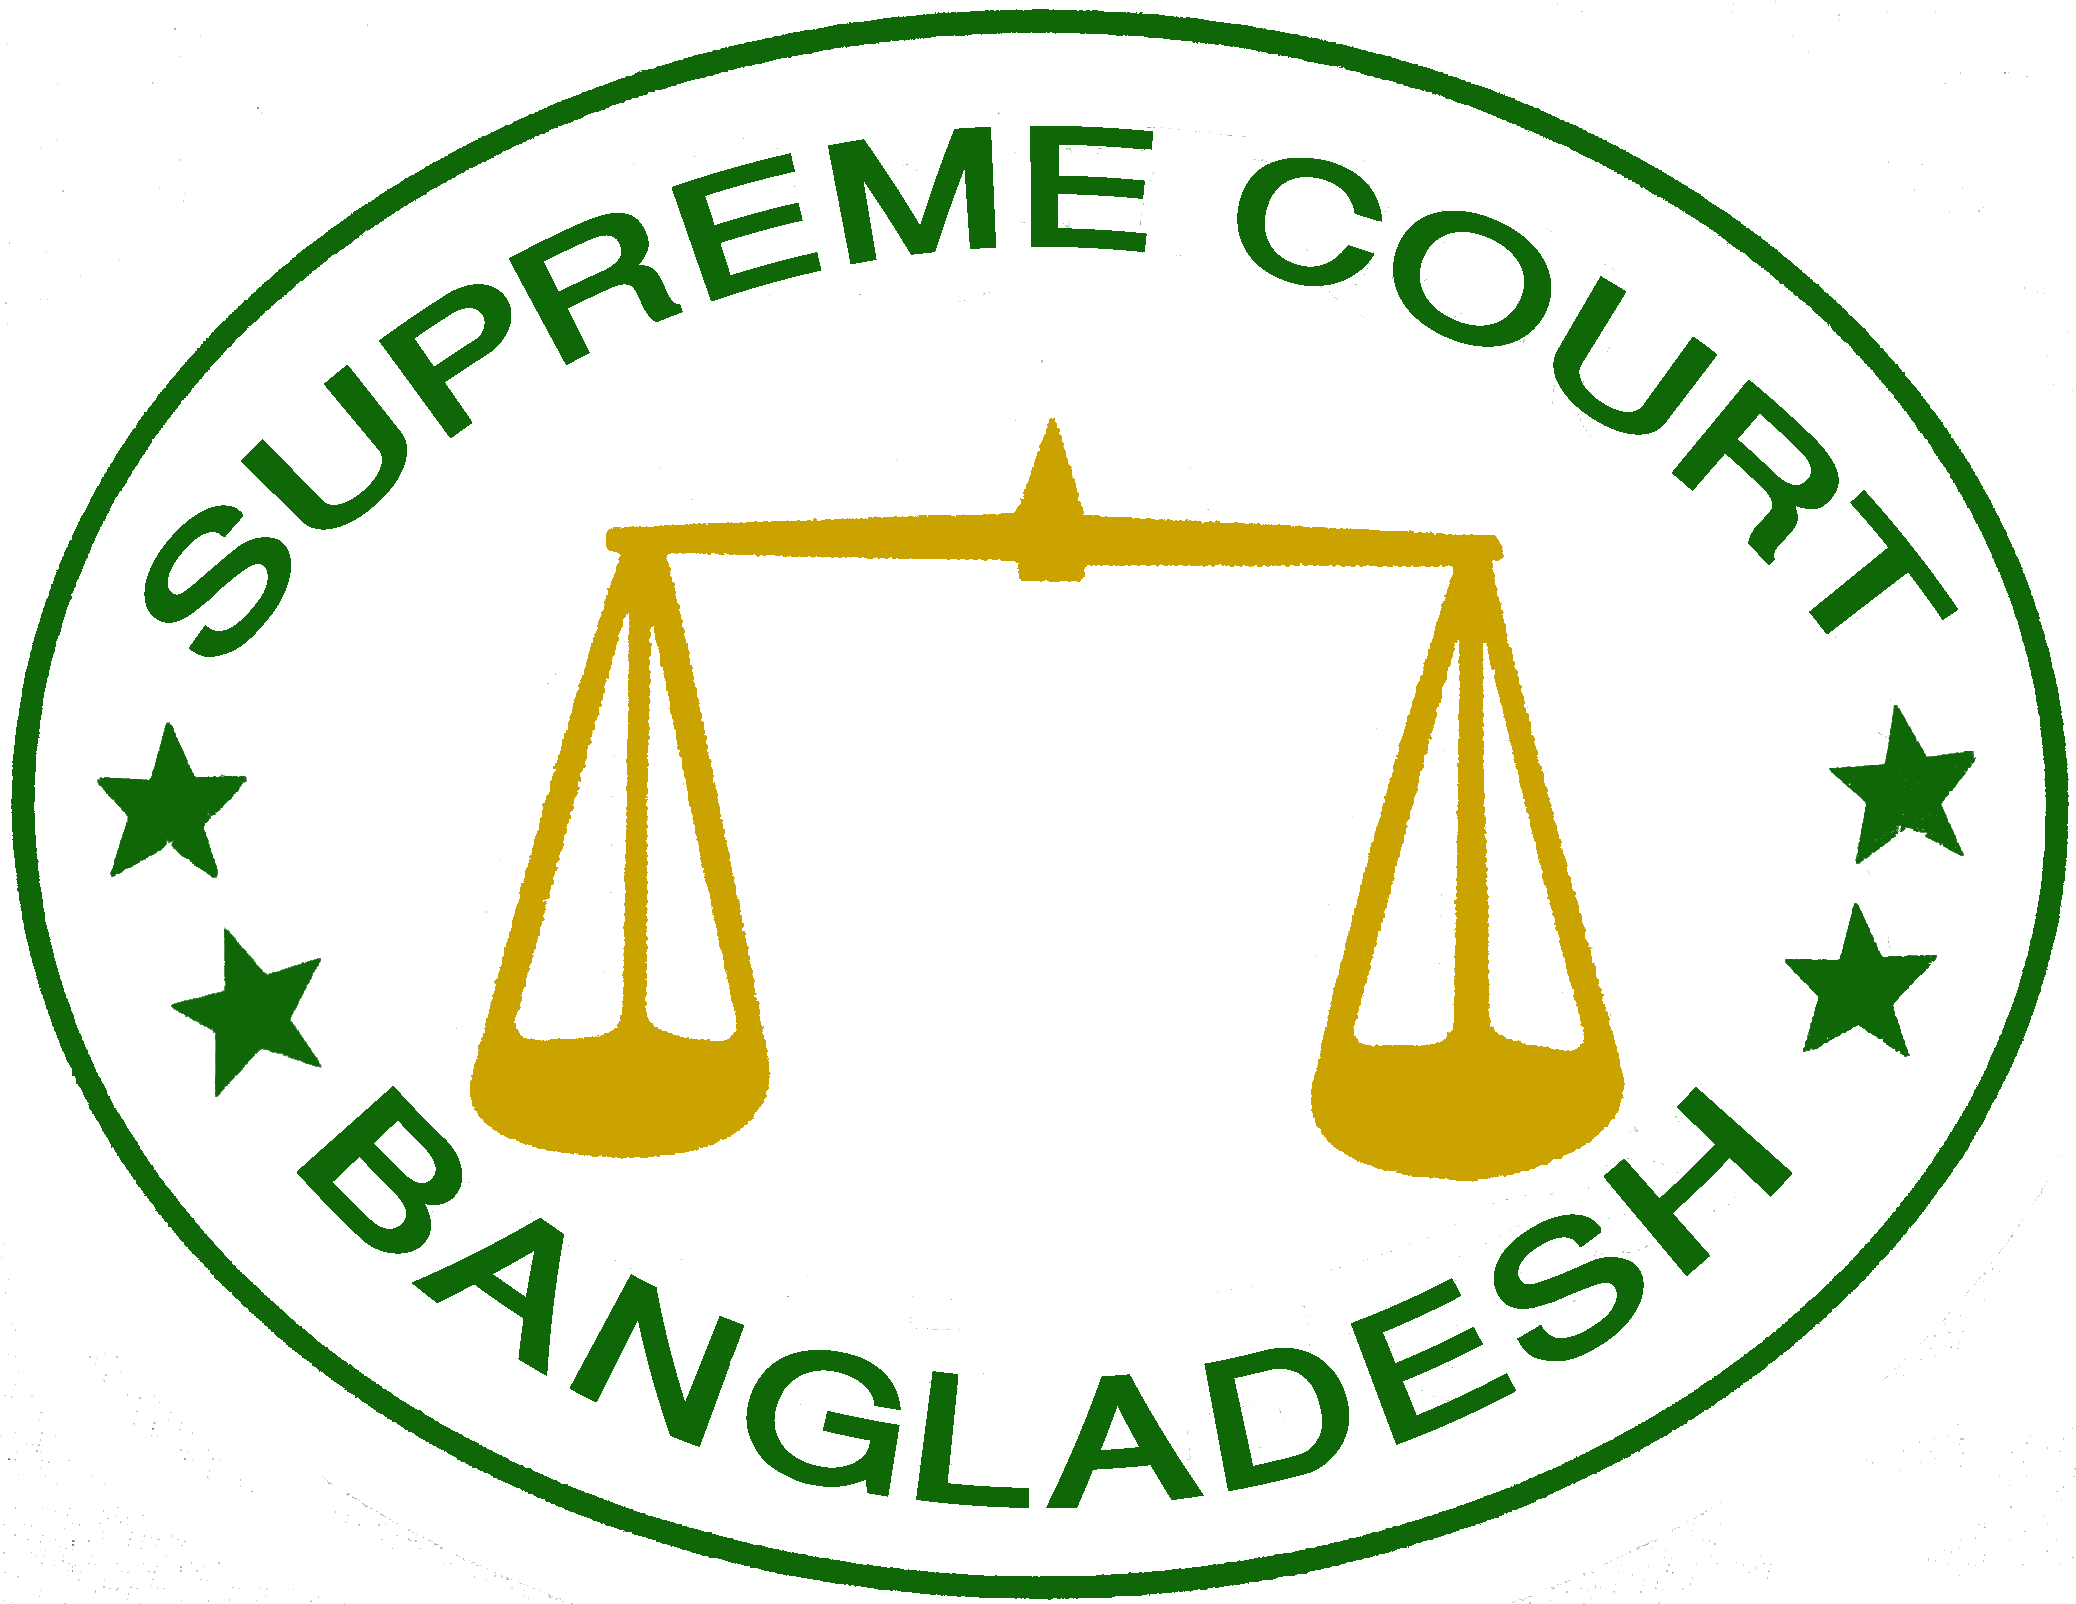 Judge clipart supreme law land. Hc order about president